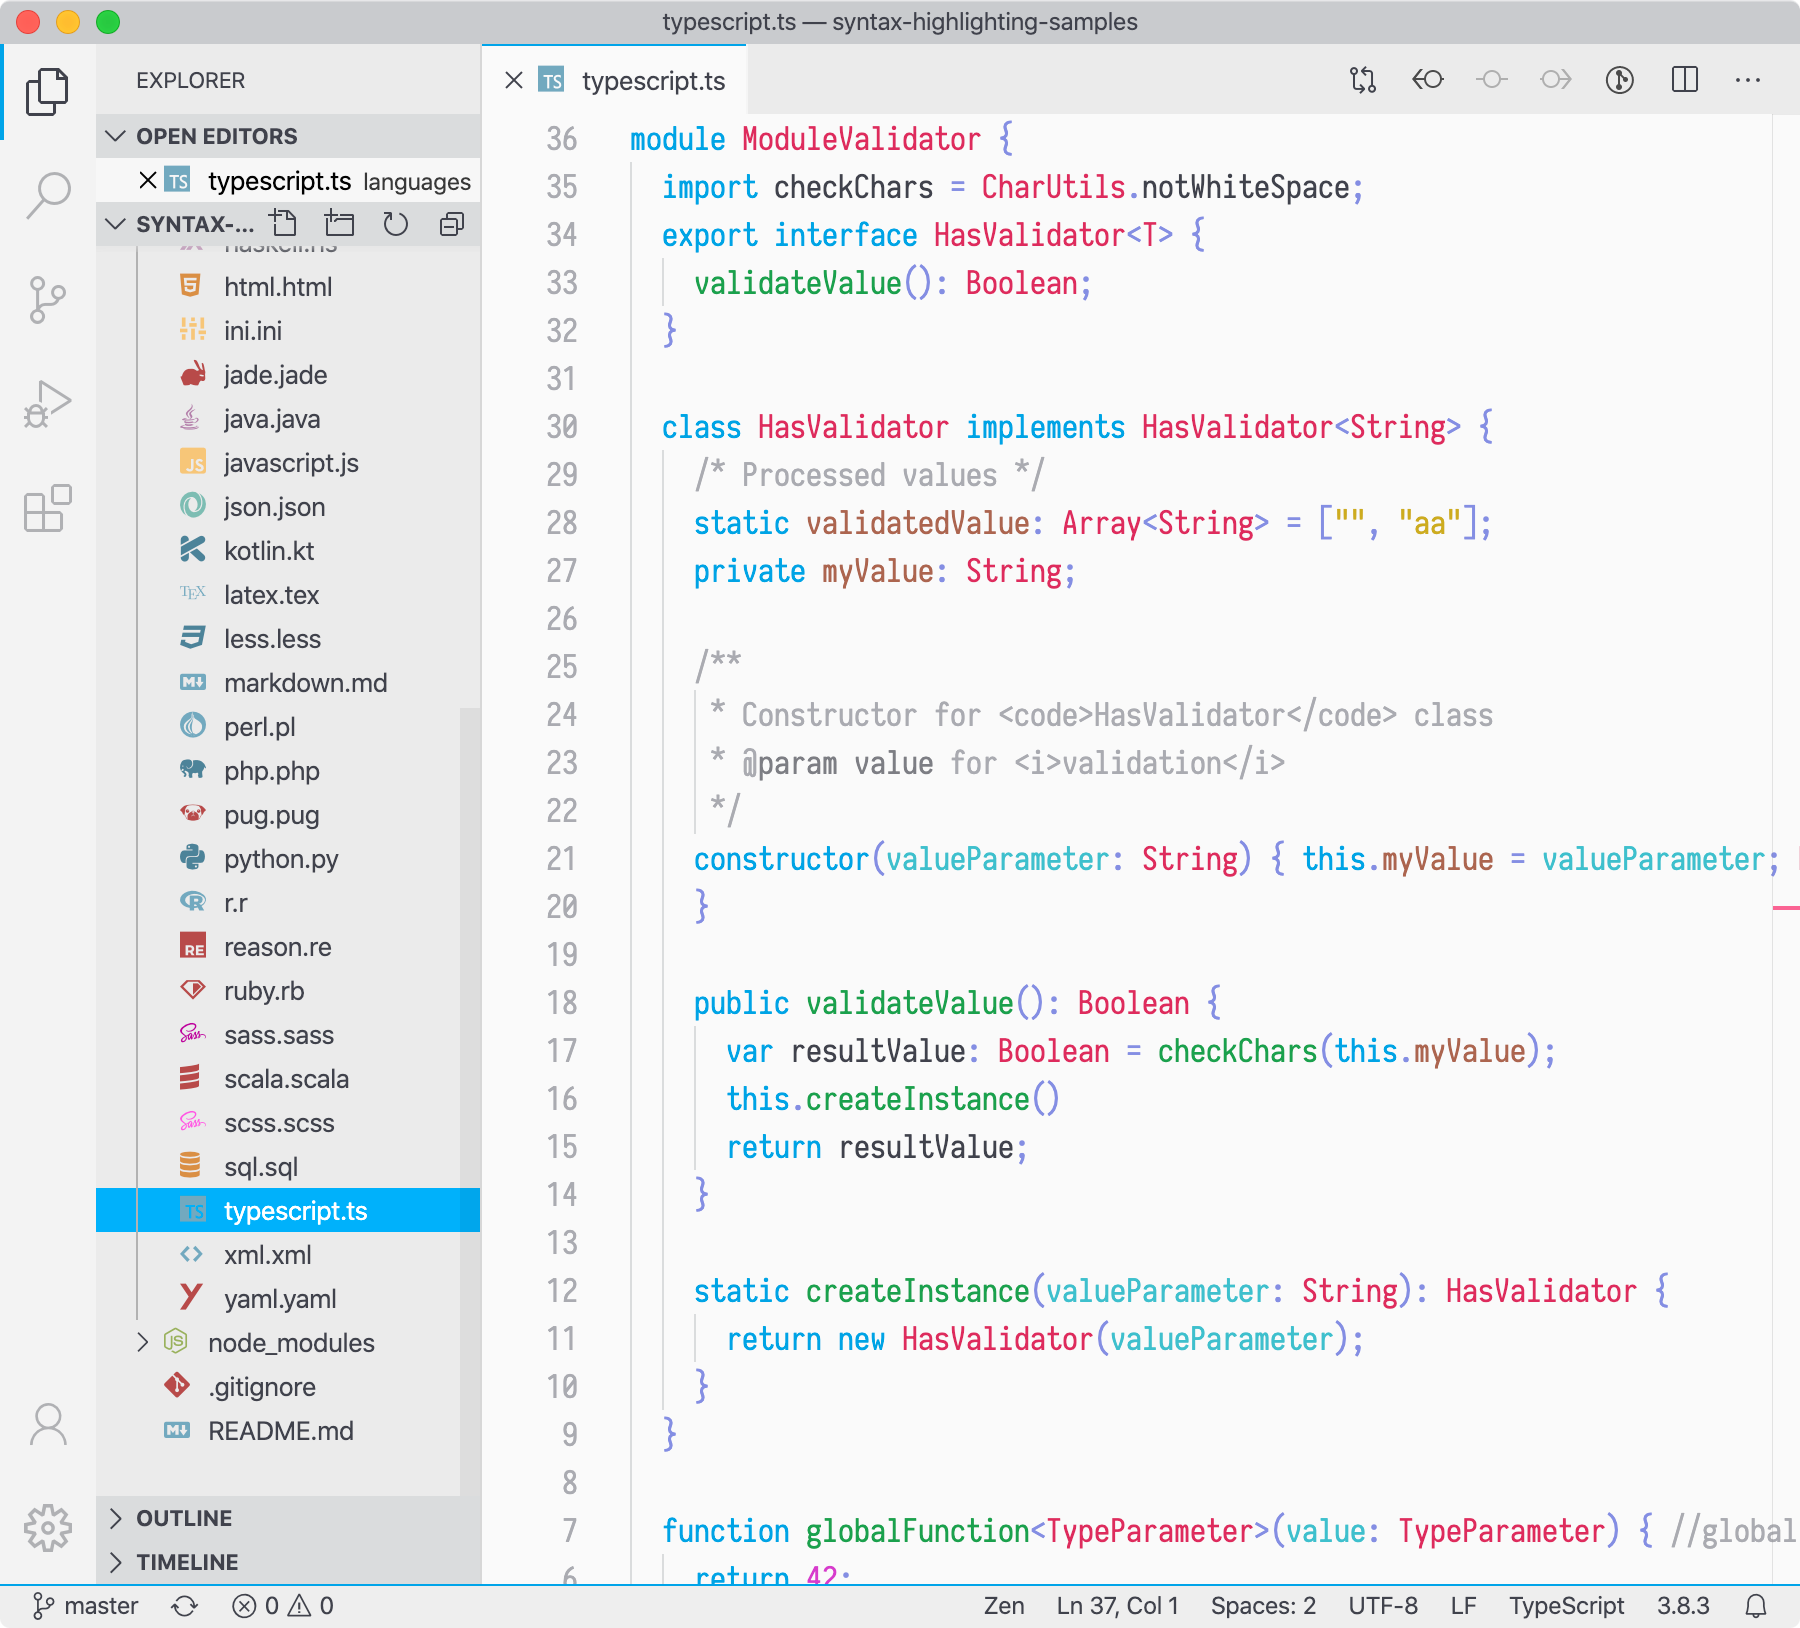 Bluloco Light theme from VS Code Marketplace